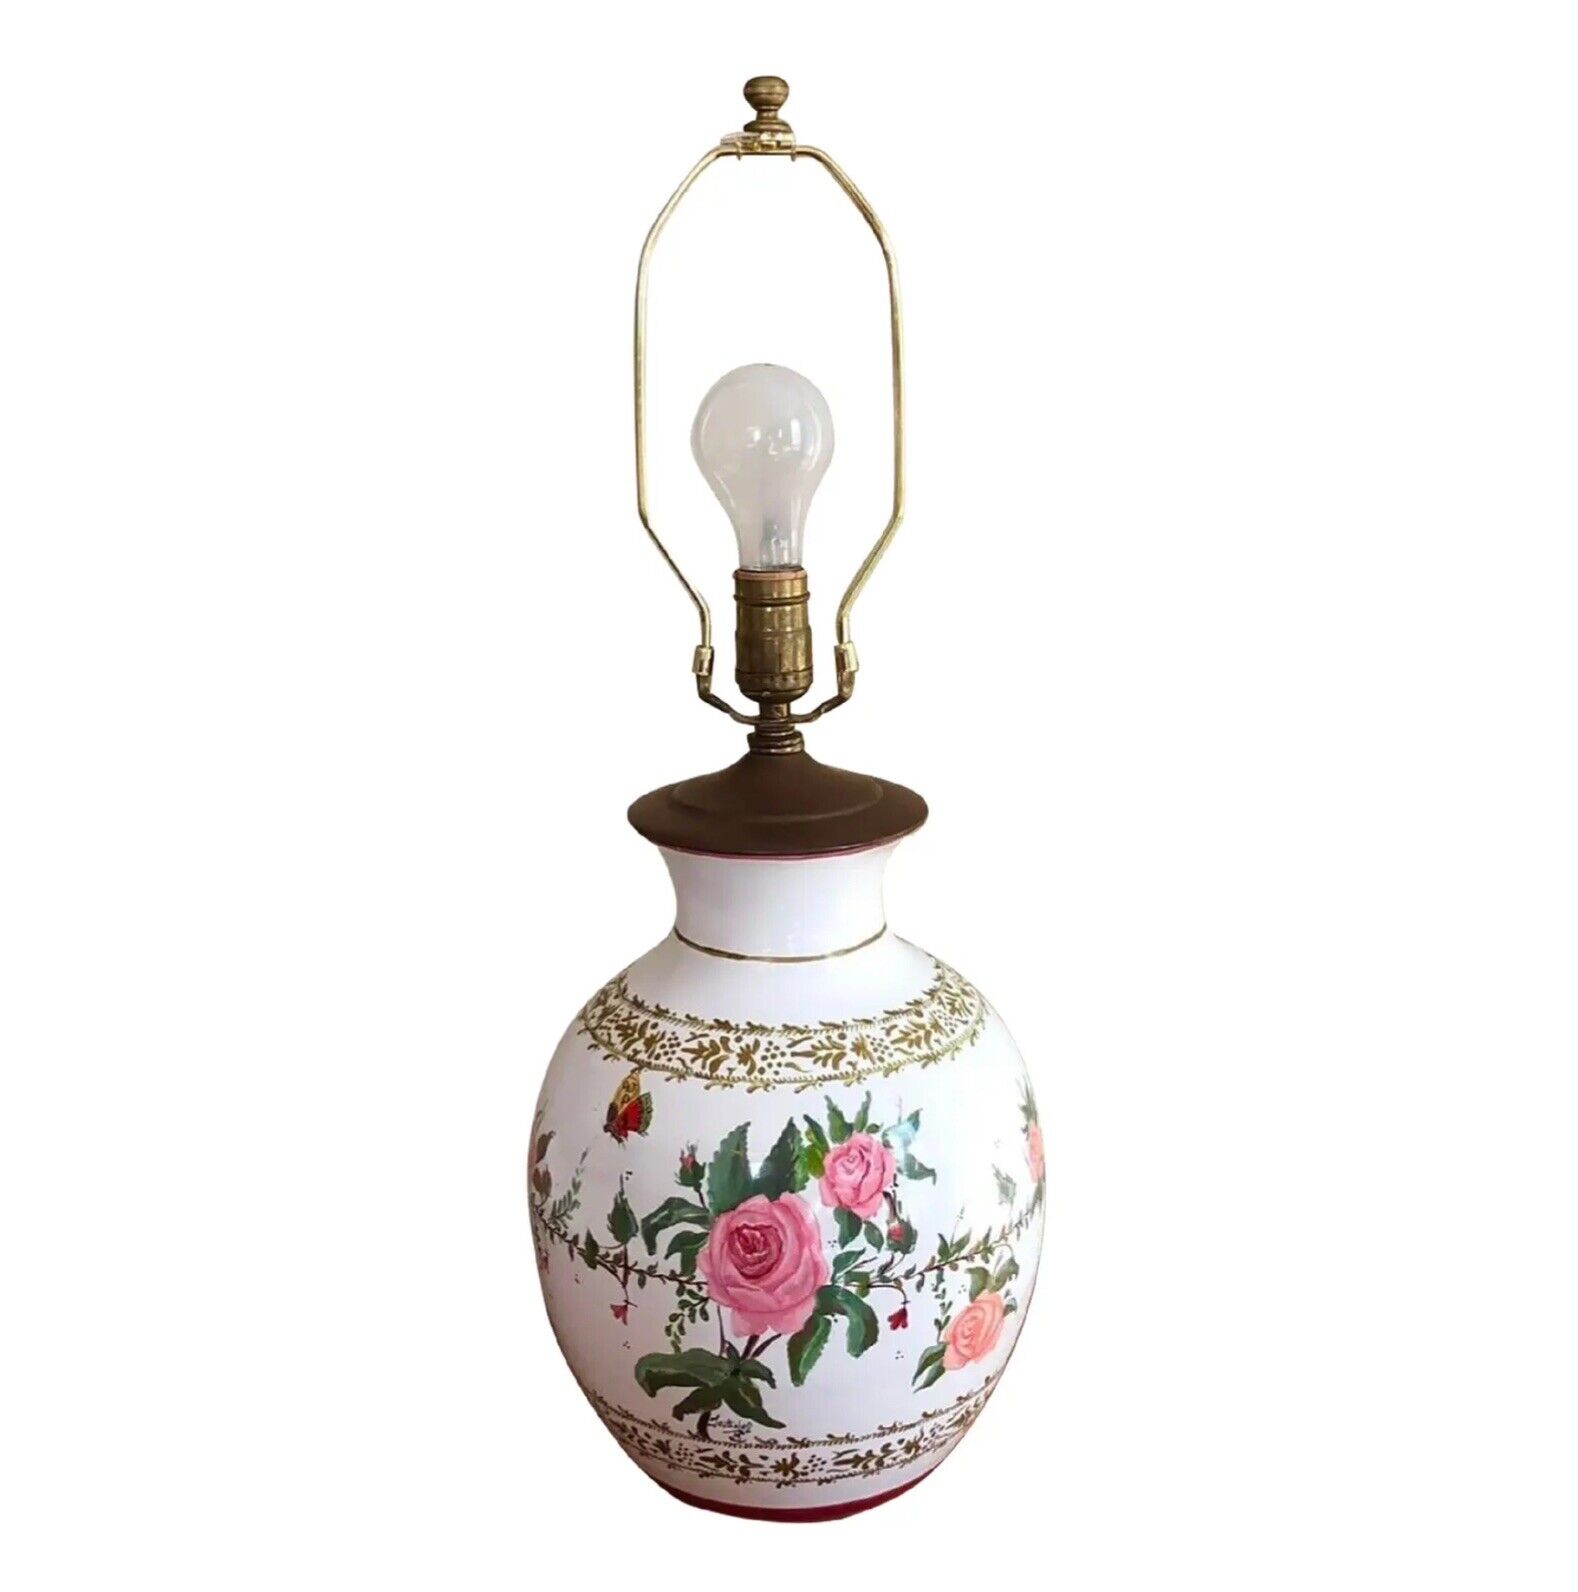 VTG 3 Way Ceramic Table Lamp Artist Signed Flowers Roses Painted Gold Italy 24”H